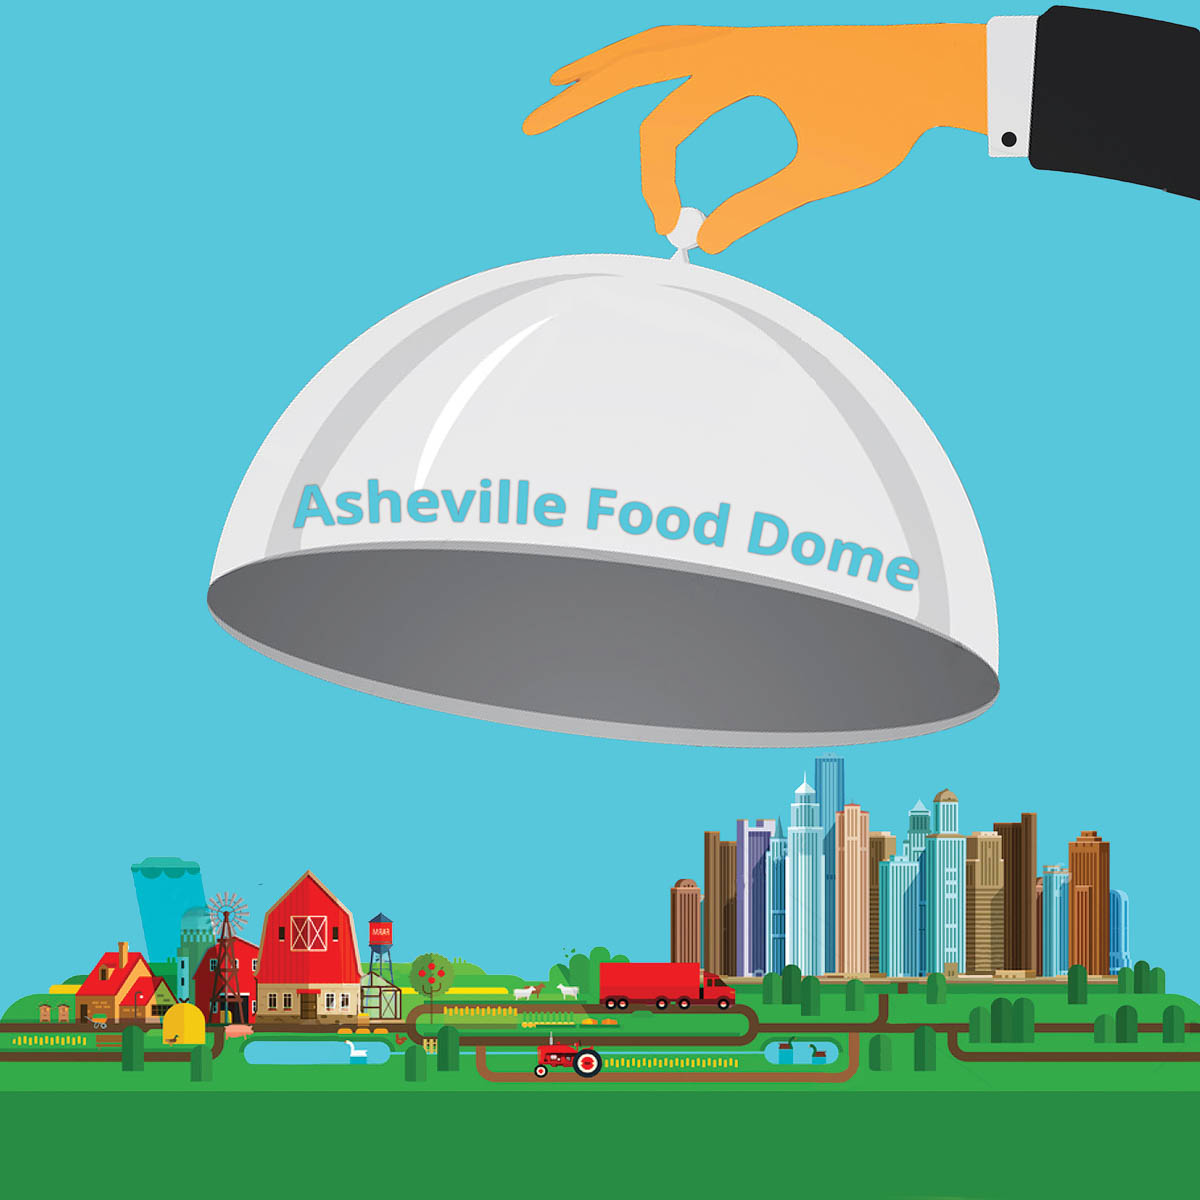 Eat Your View: The Asheville Food Dome